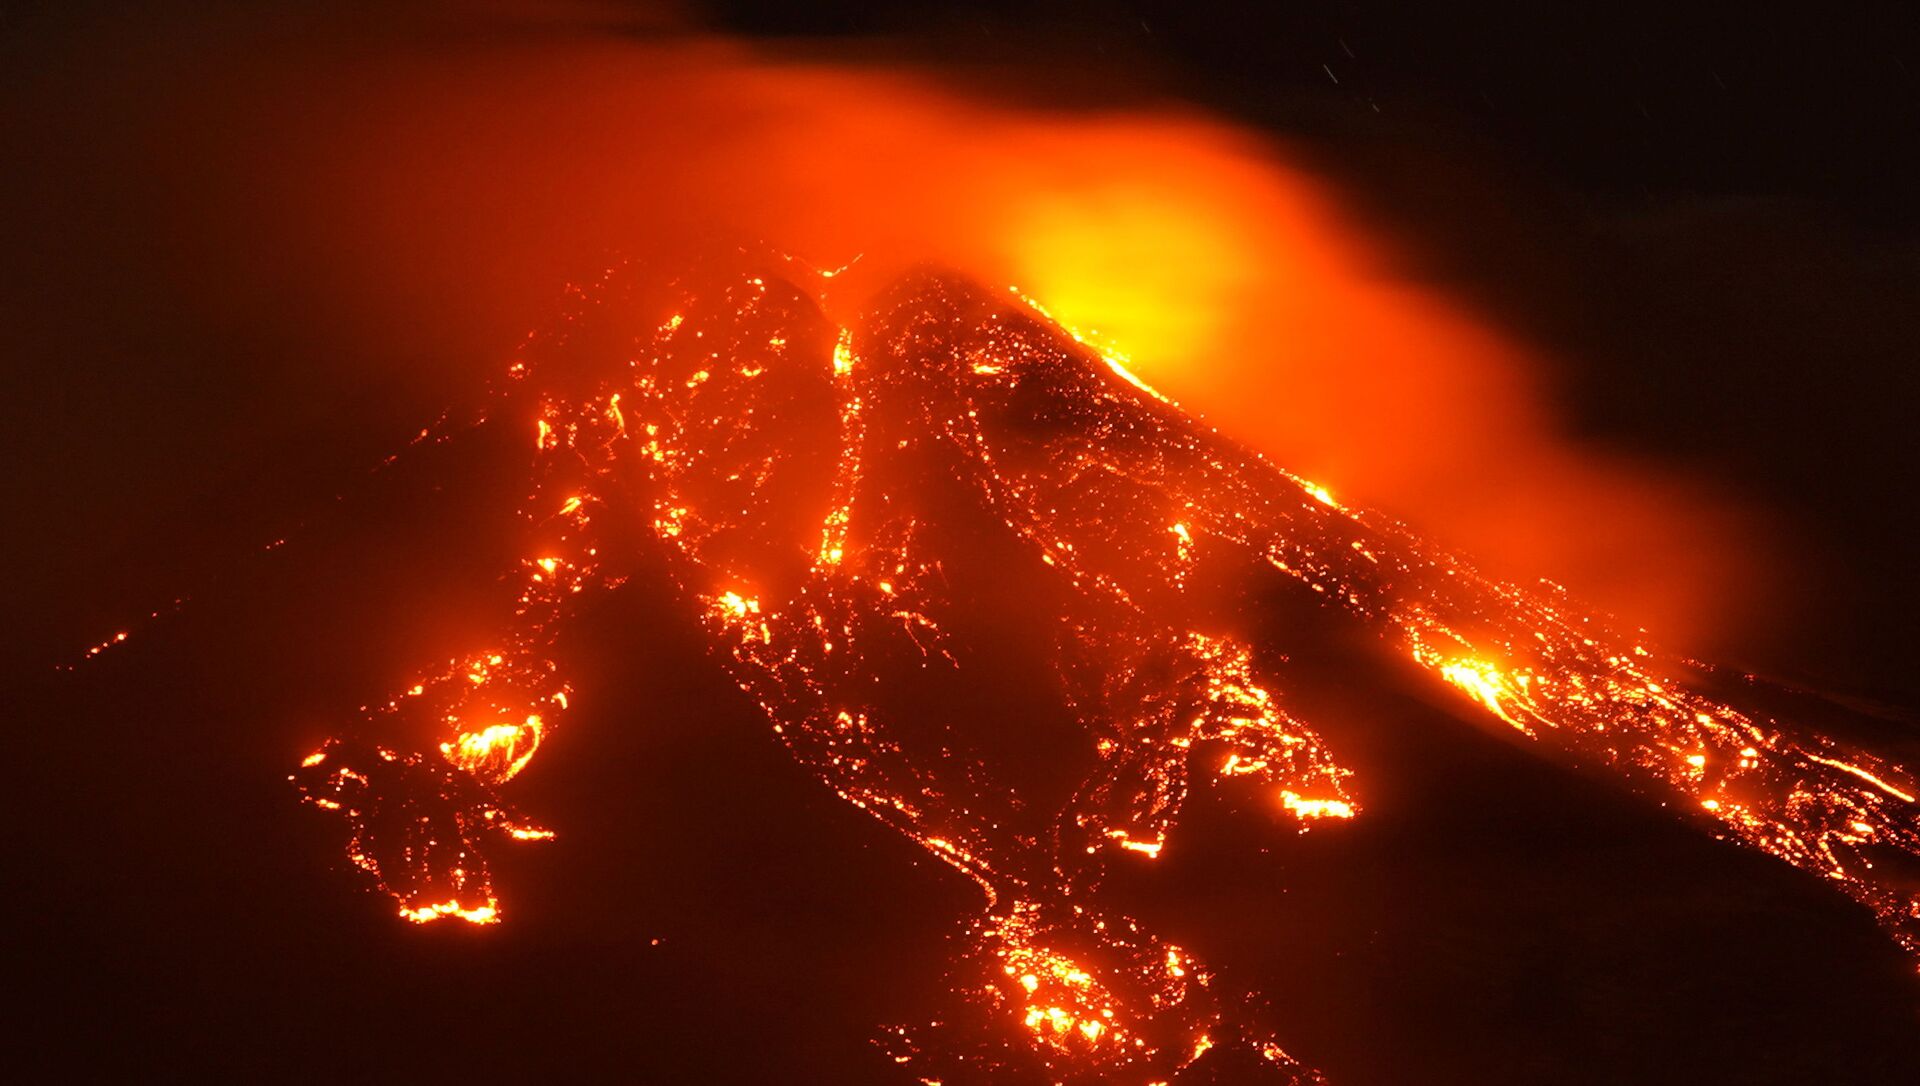 Streams of red hot lava flow as Mount Etna, Europe's most active volcano, erupts, seen from Giarre, Italy, February 16, 2021. - Sputnik International, 1920, 01.03.2021